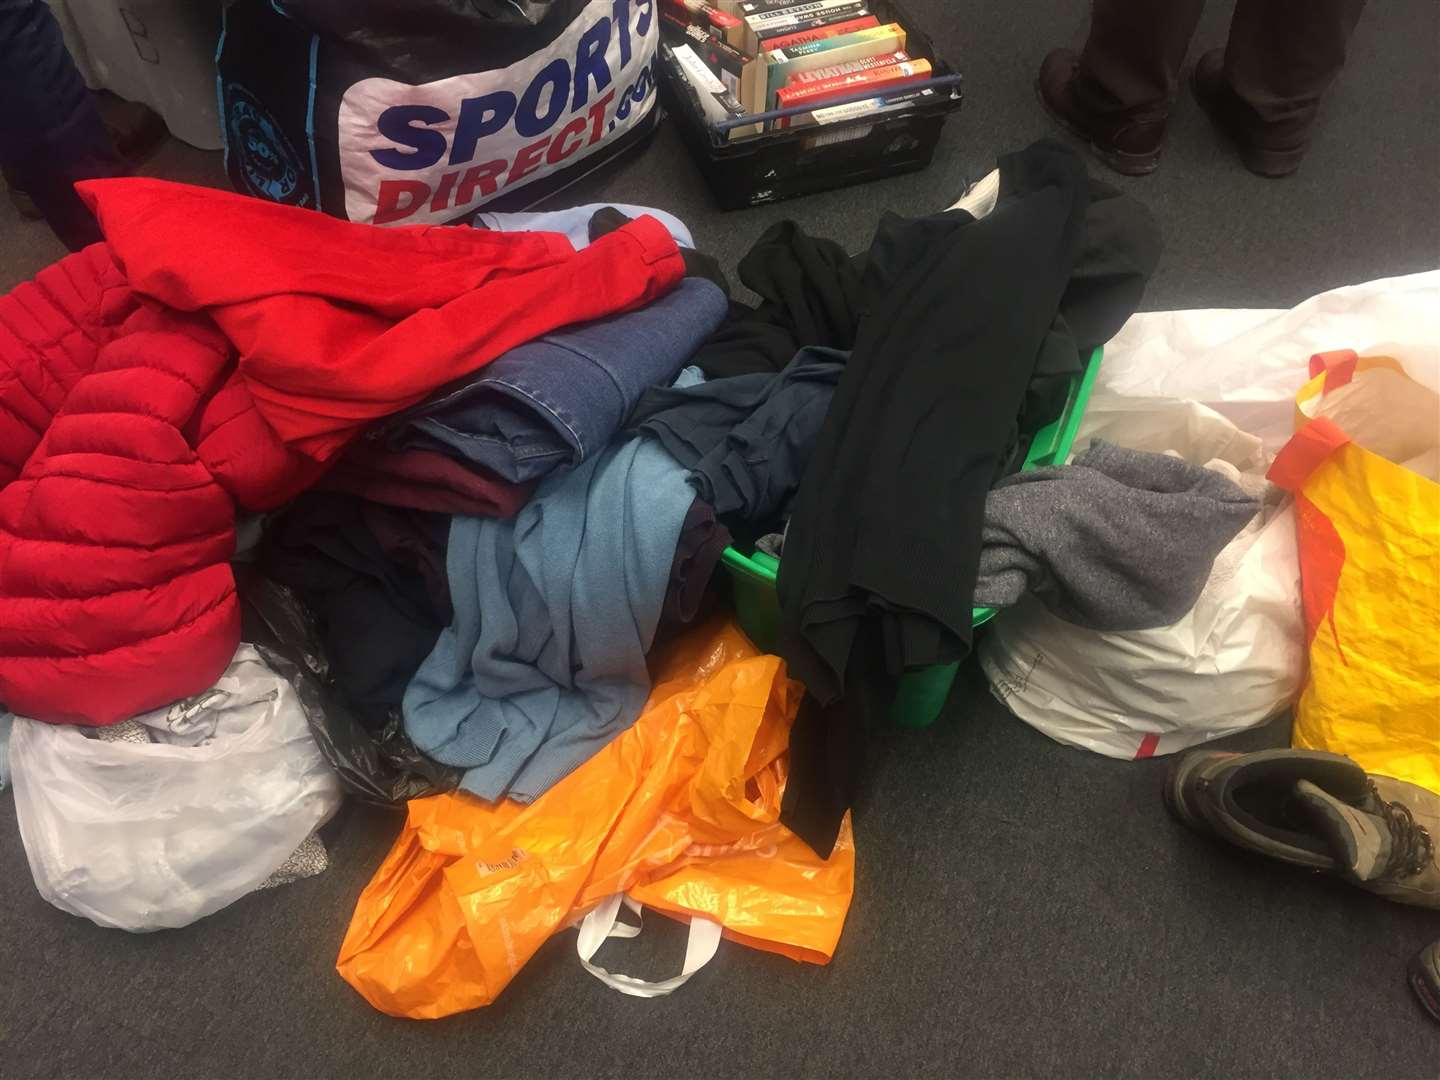 Spare clothes are available in case anyone needs an extra jumper or new trousers, as are books